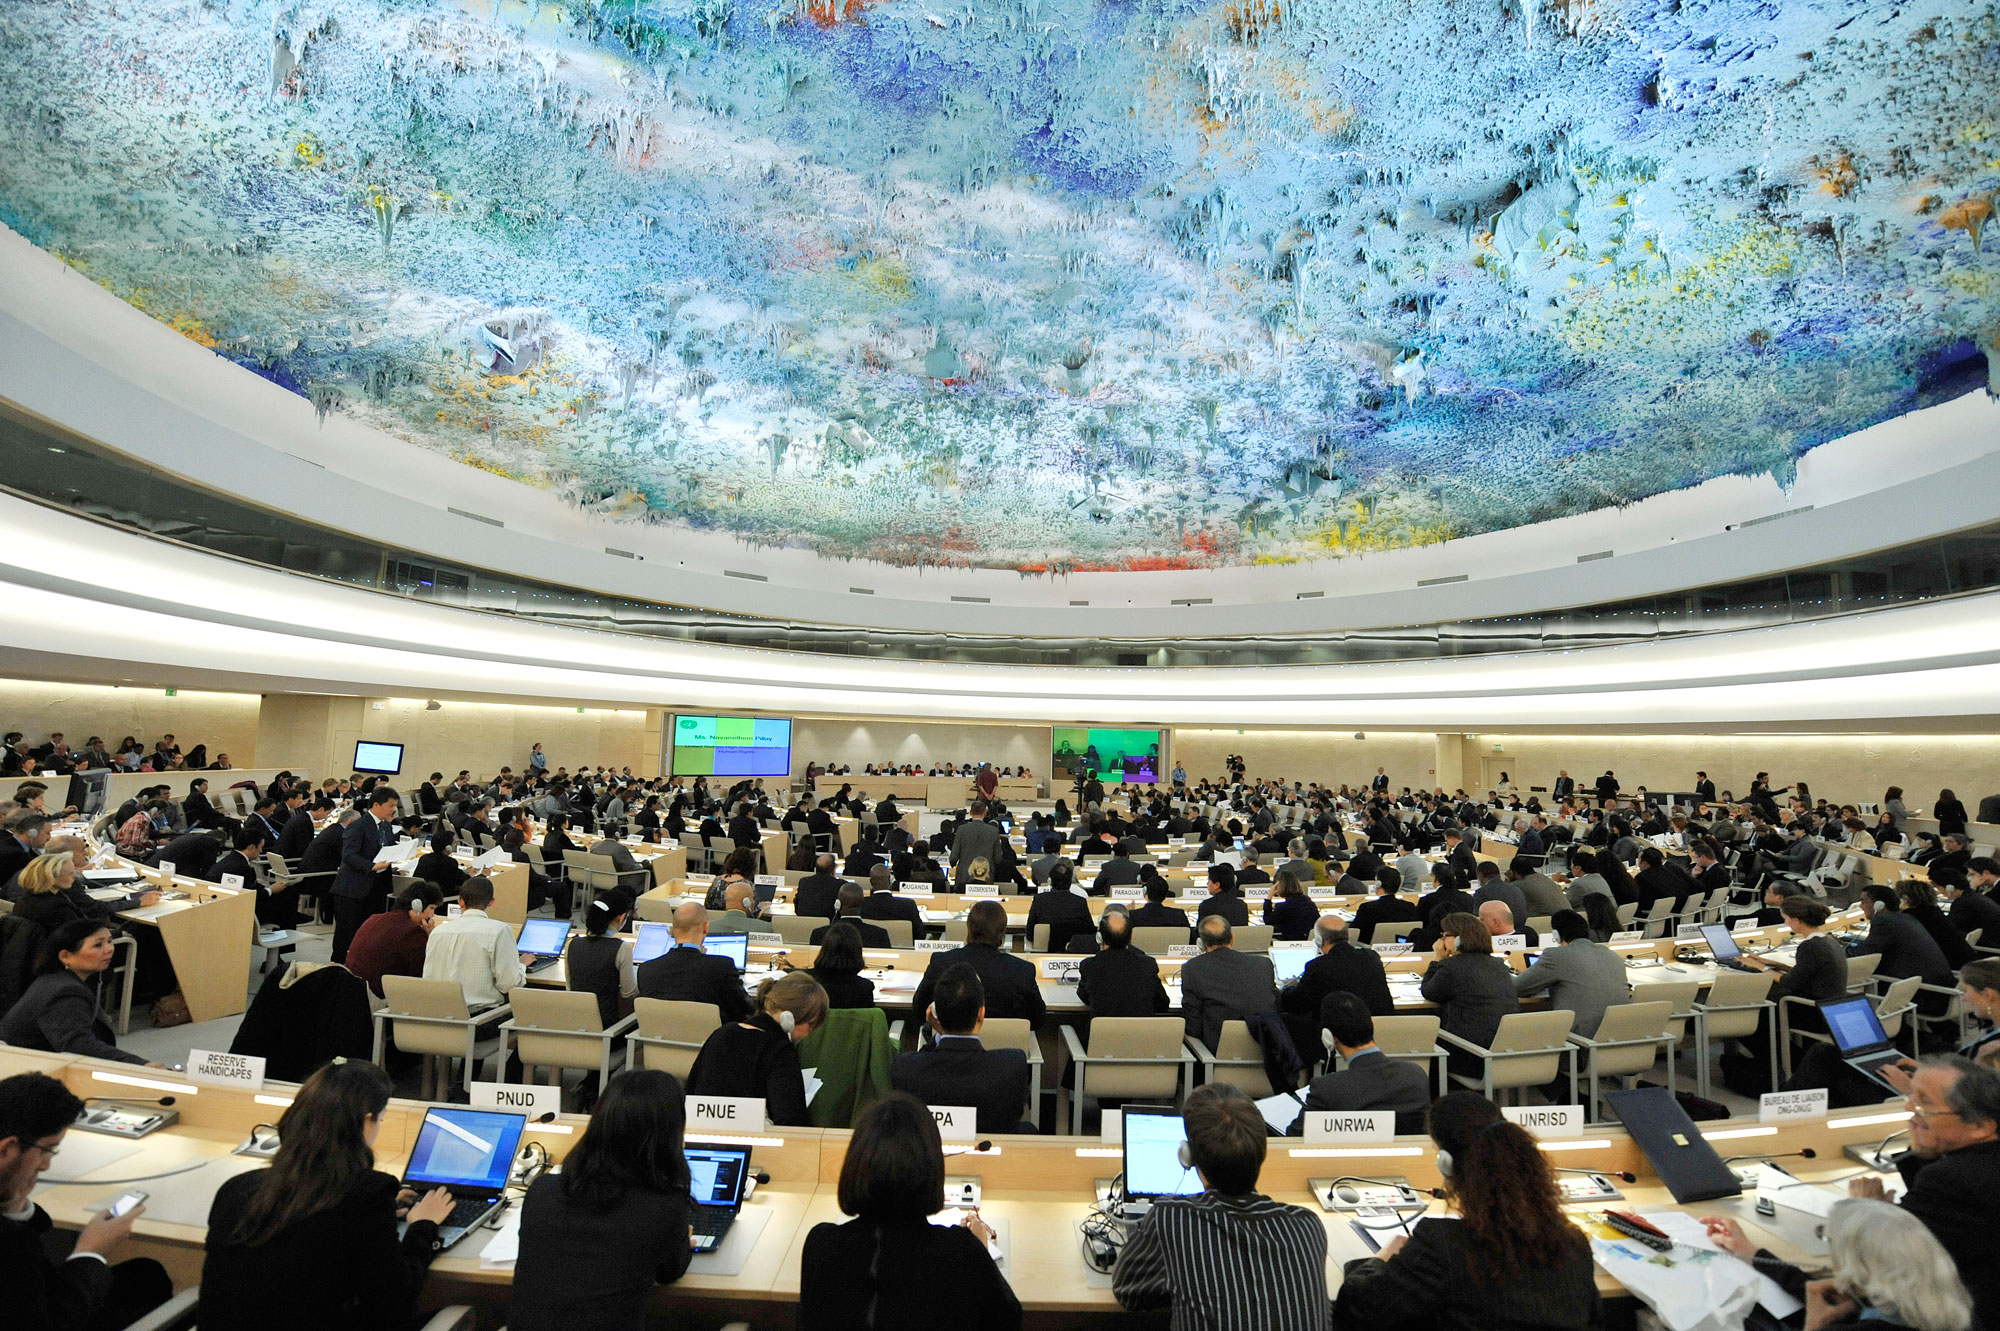 Archival photo of the UN Human Rights Council Chamber